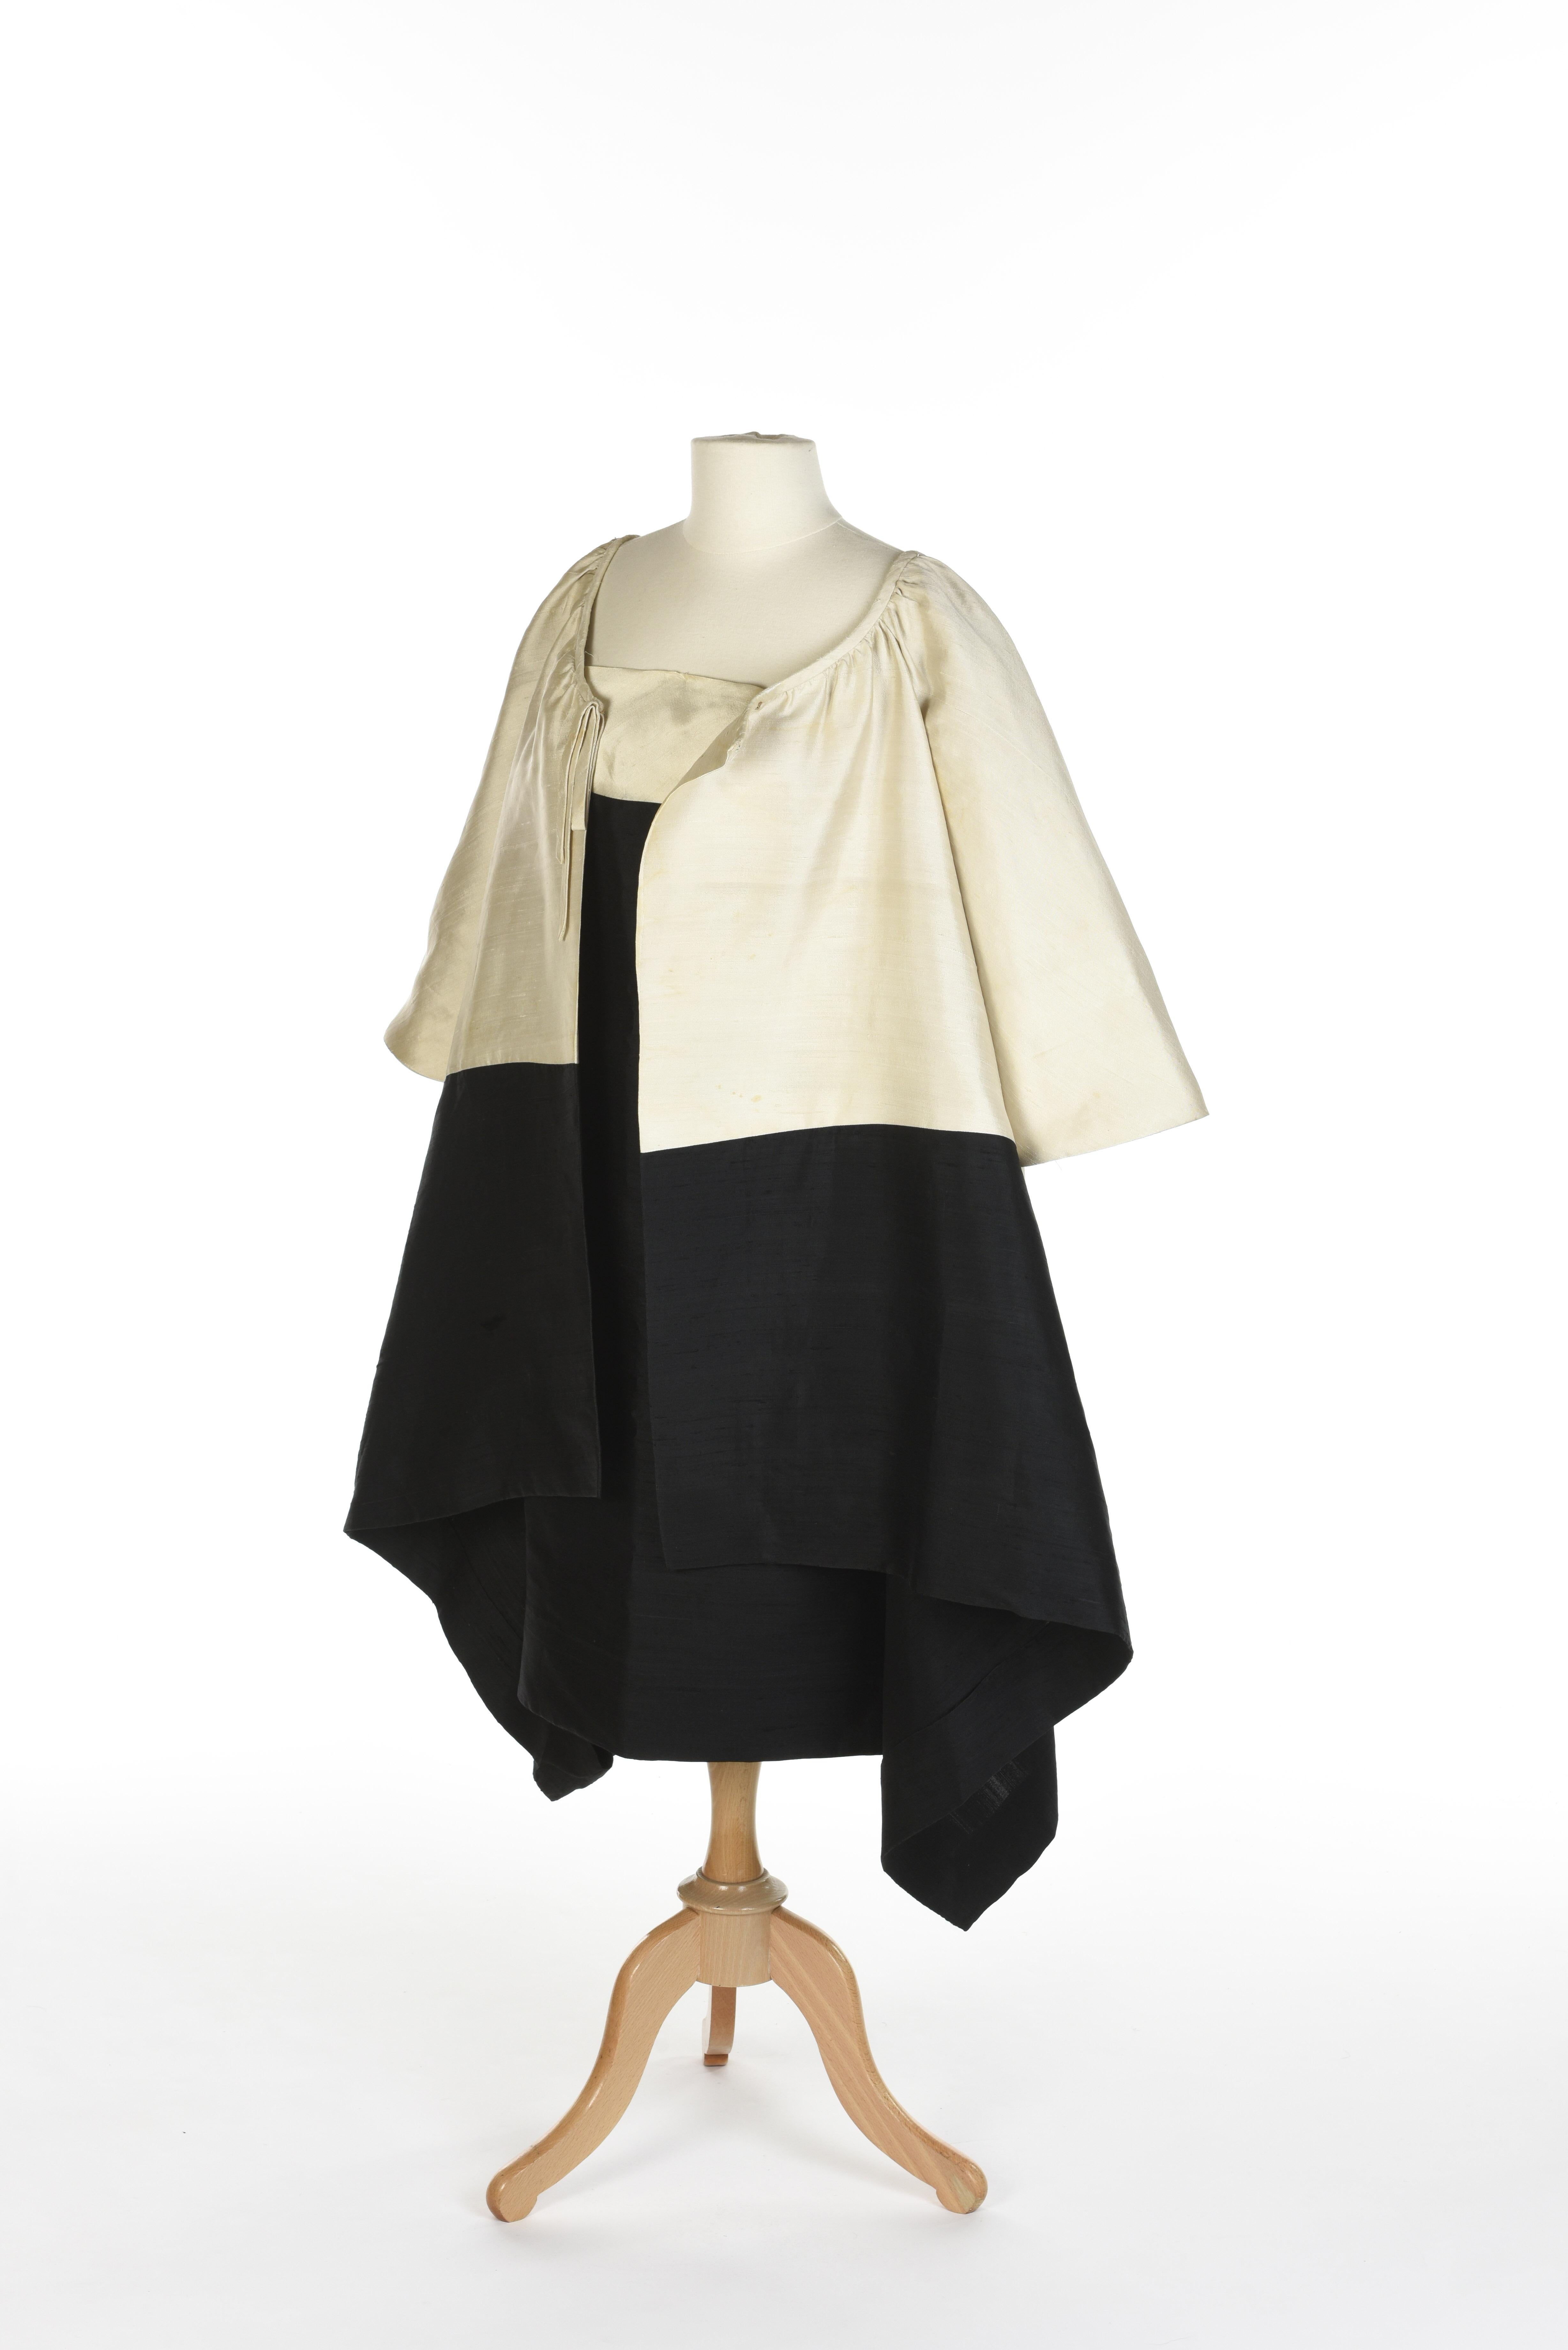 An Hubert de Givenchy French Couture Cream and Black silk Evening Set Circa 1965 For Sale 11